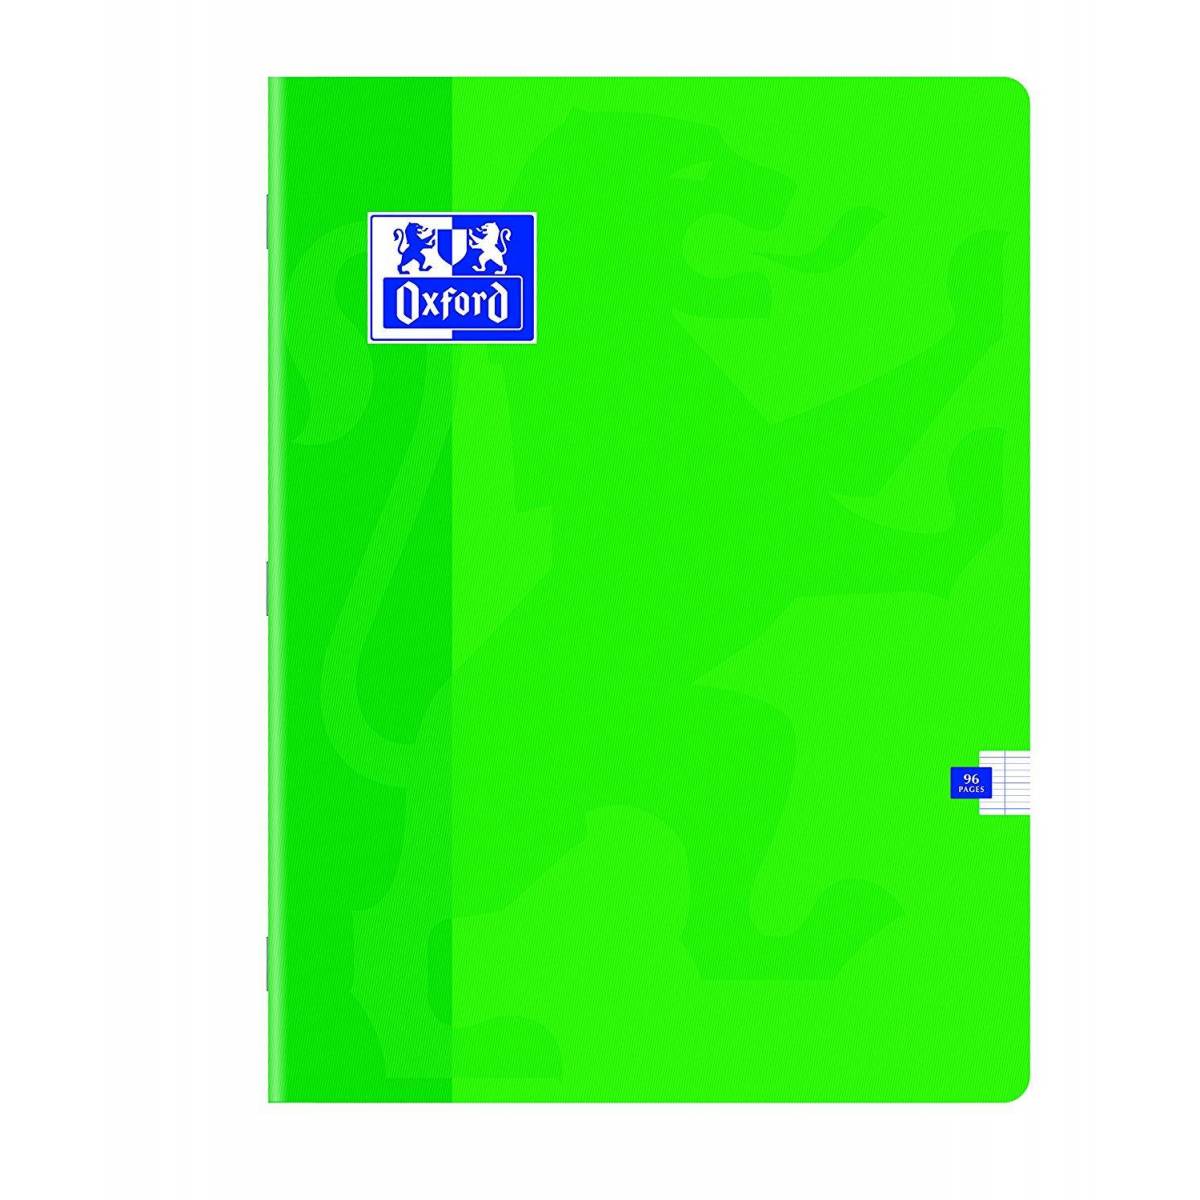 Oxford Large Tiles Notebook 24x32cm - 96 Pages